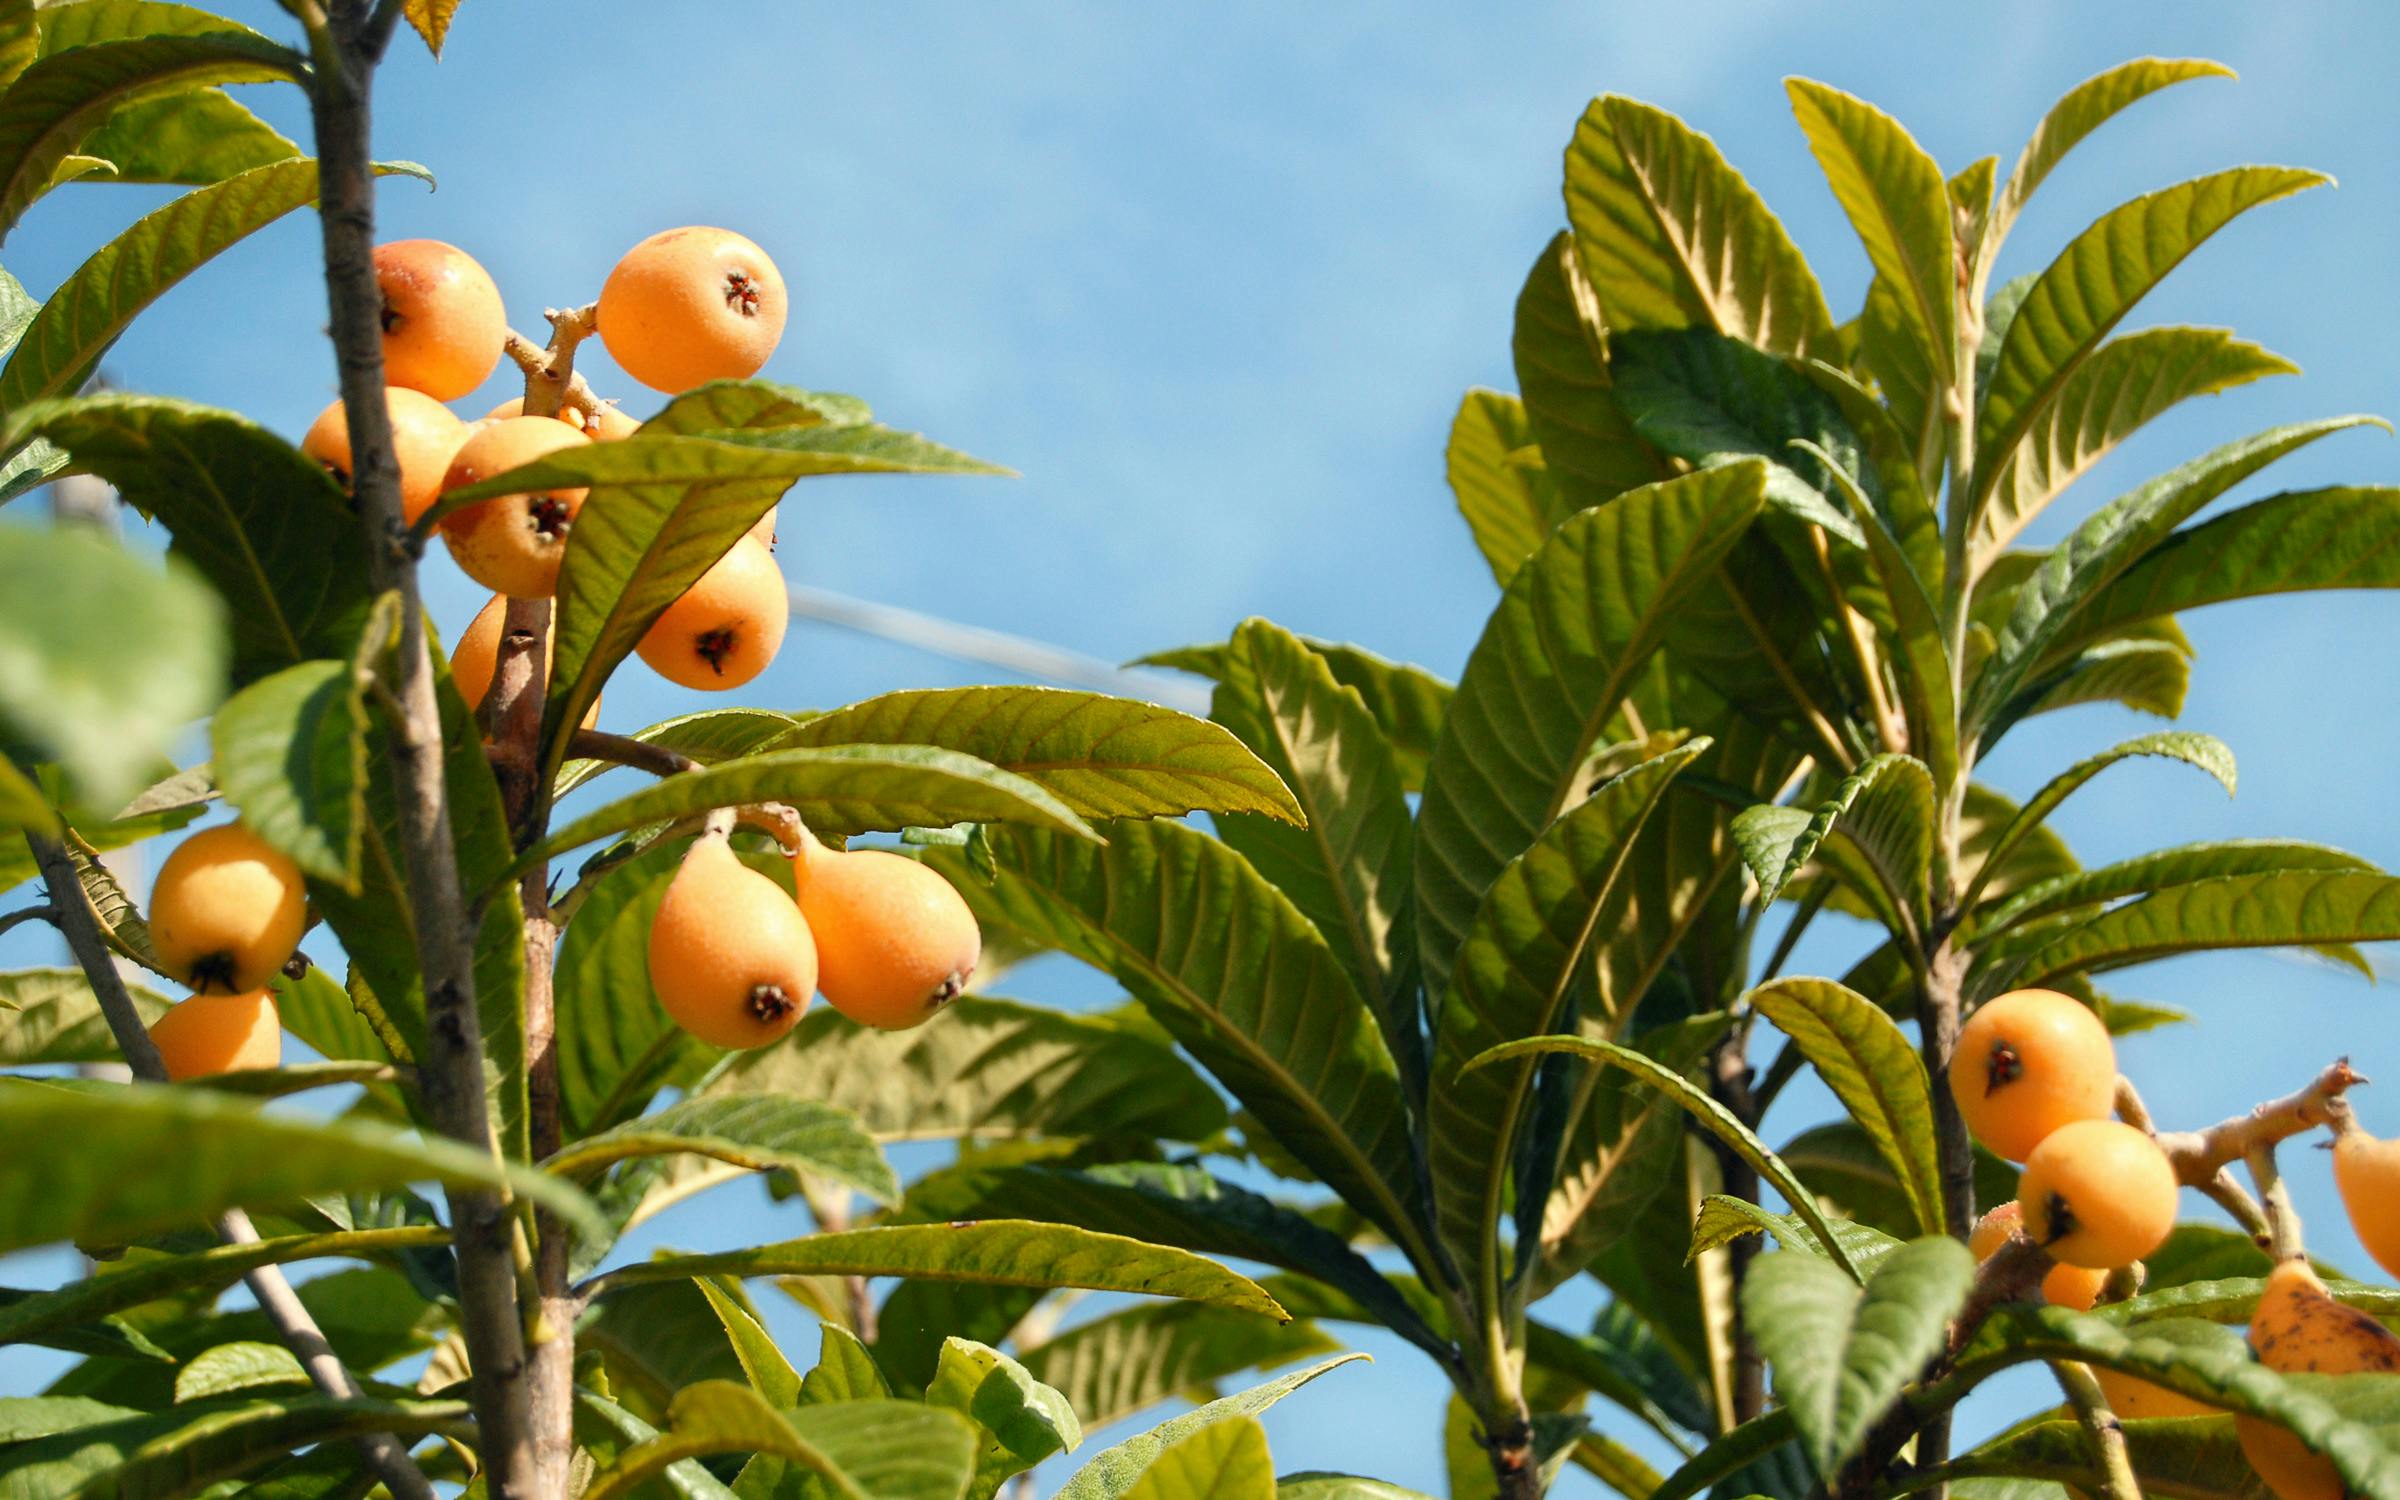 https://img.texasmonthly.com/2022/02/edible-texas-plants-loquat-featured.jpg?auto=compress&crop=faces&fit=fit&fm=pjpg&ixlib=php-3.3.1&q=45